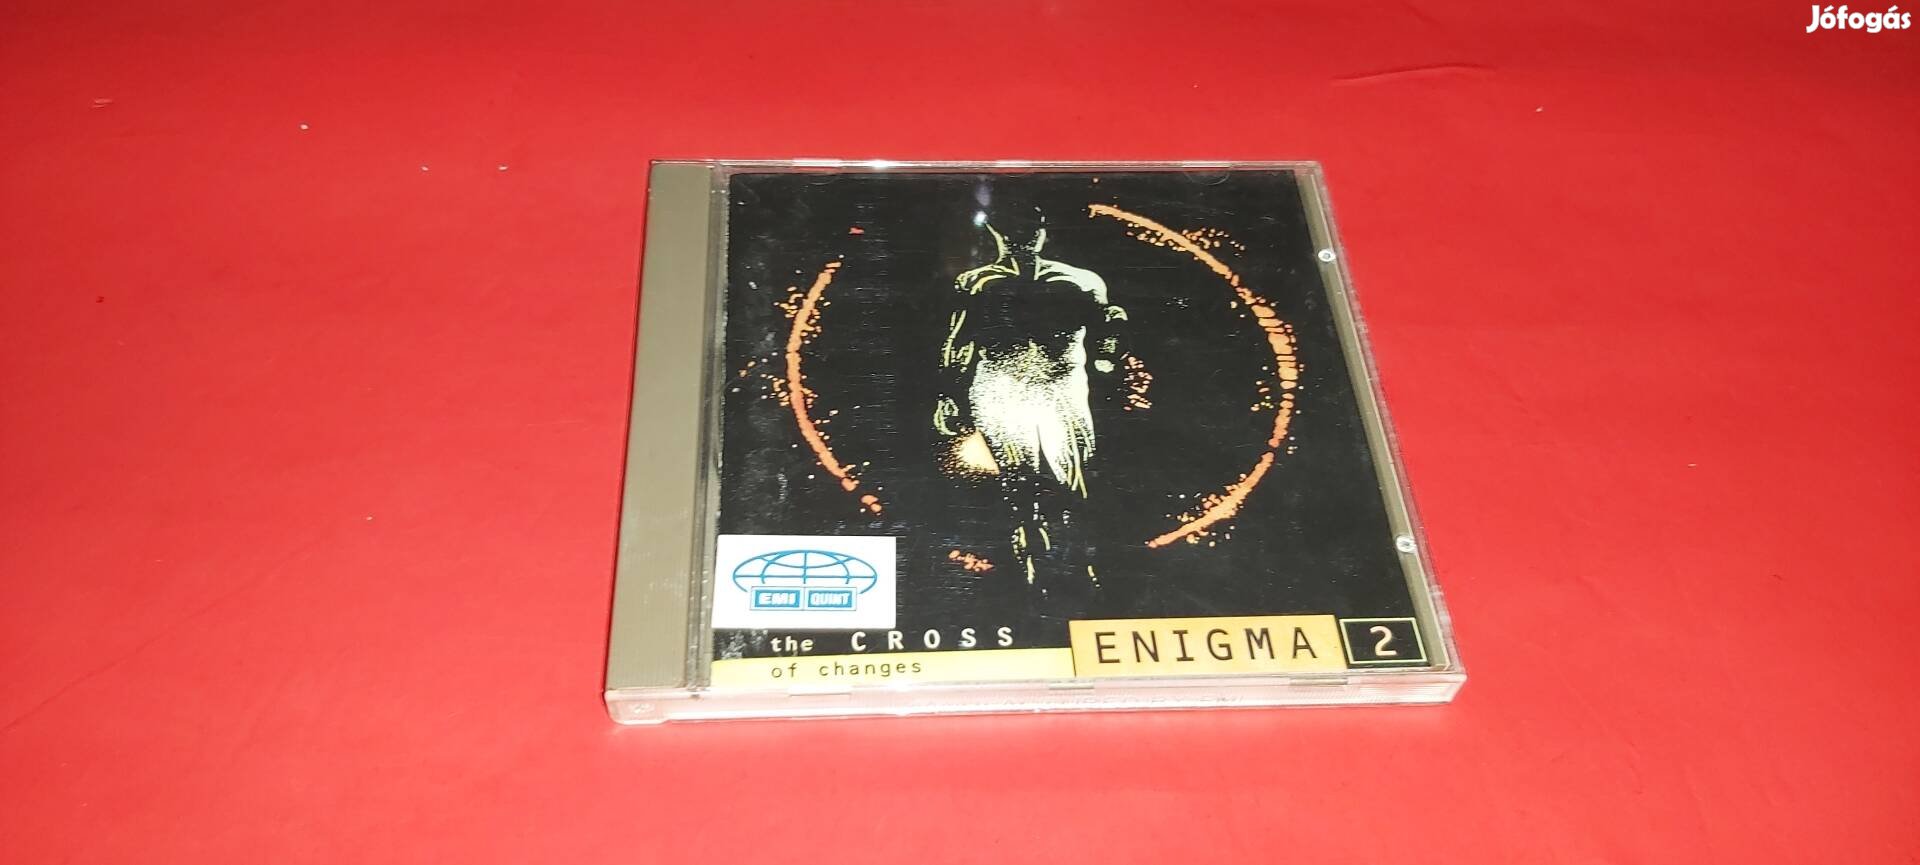 Enigma 2 The cross of changes Cd 1993 Holland